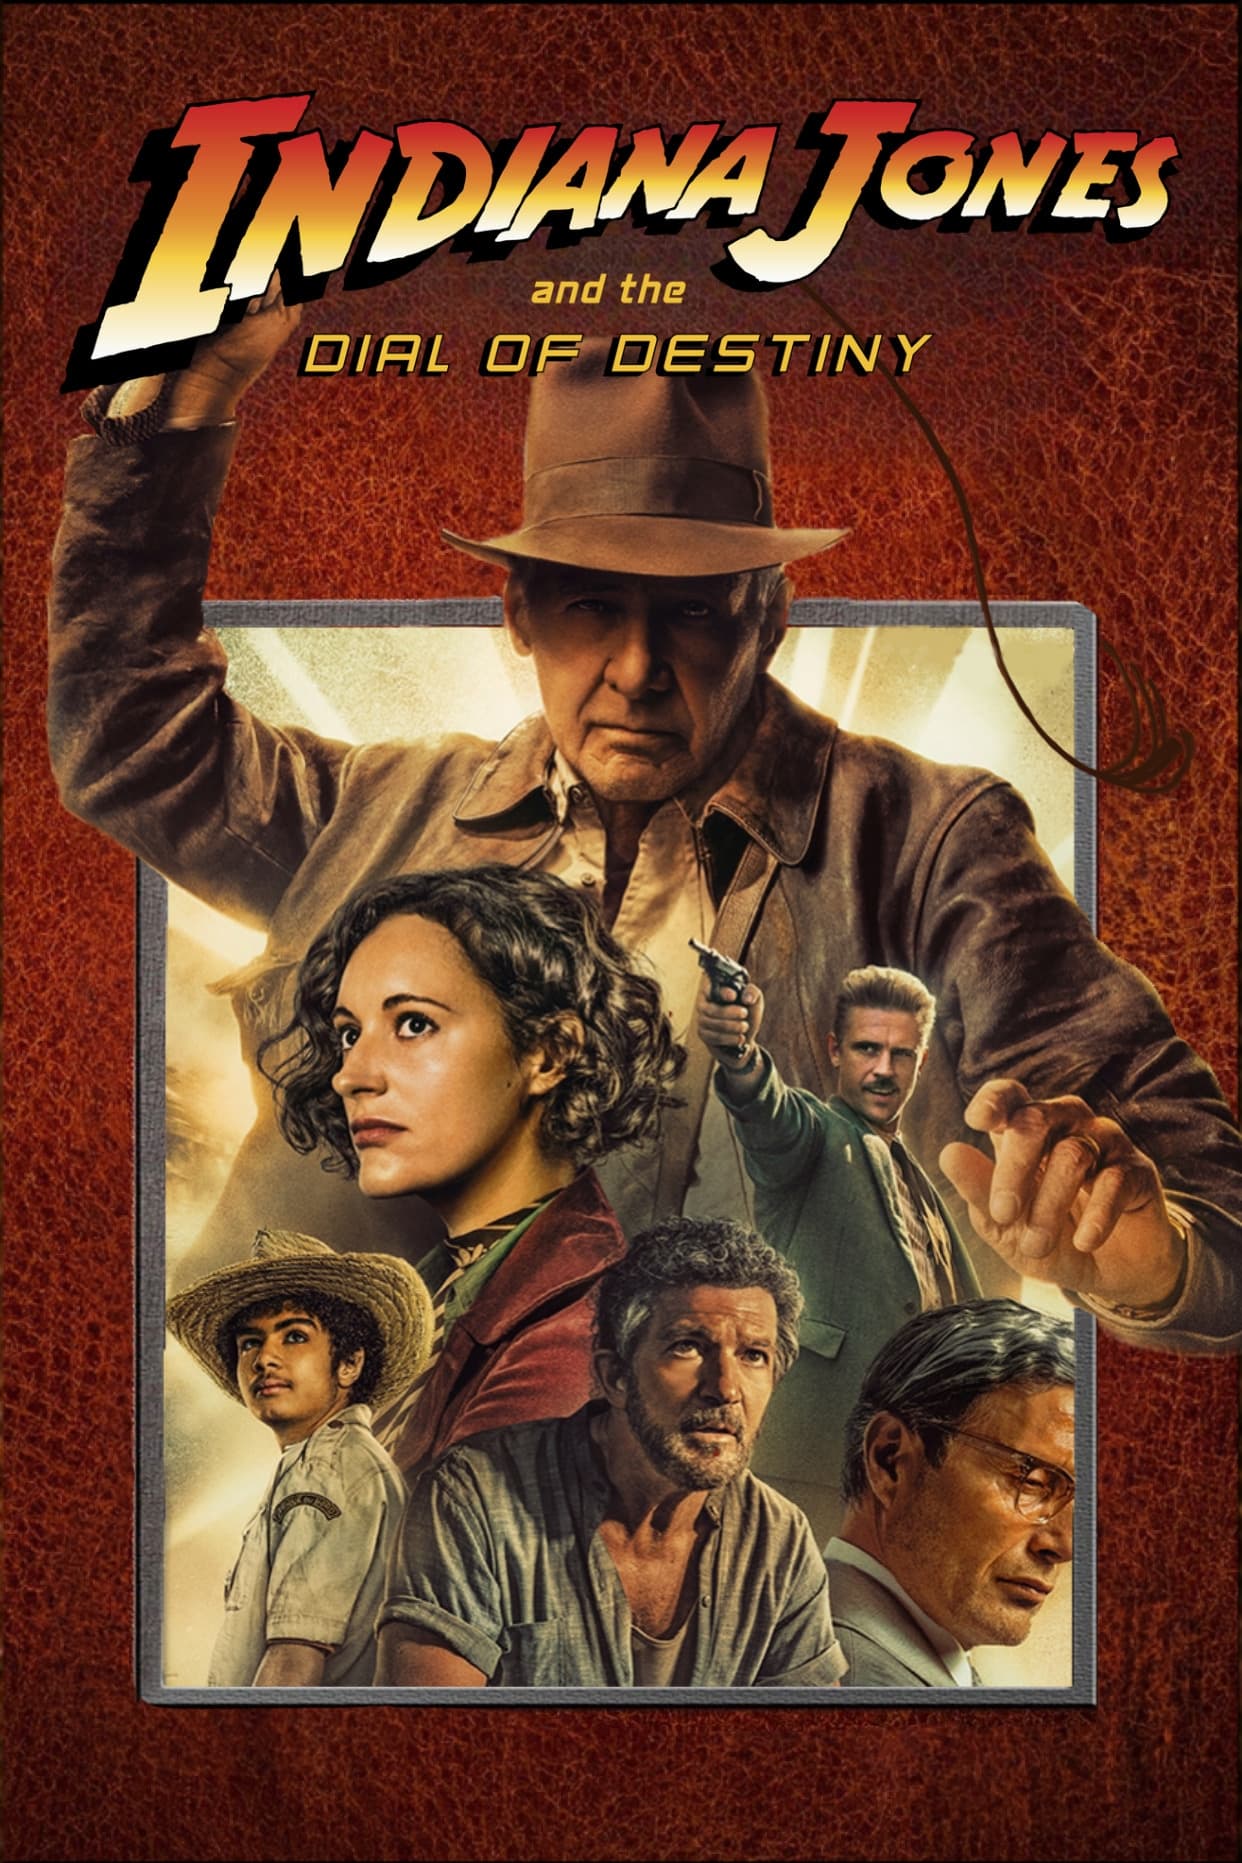 Image Indiana Jones and the Dial of Destiny